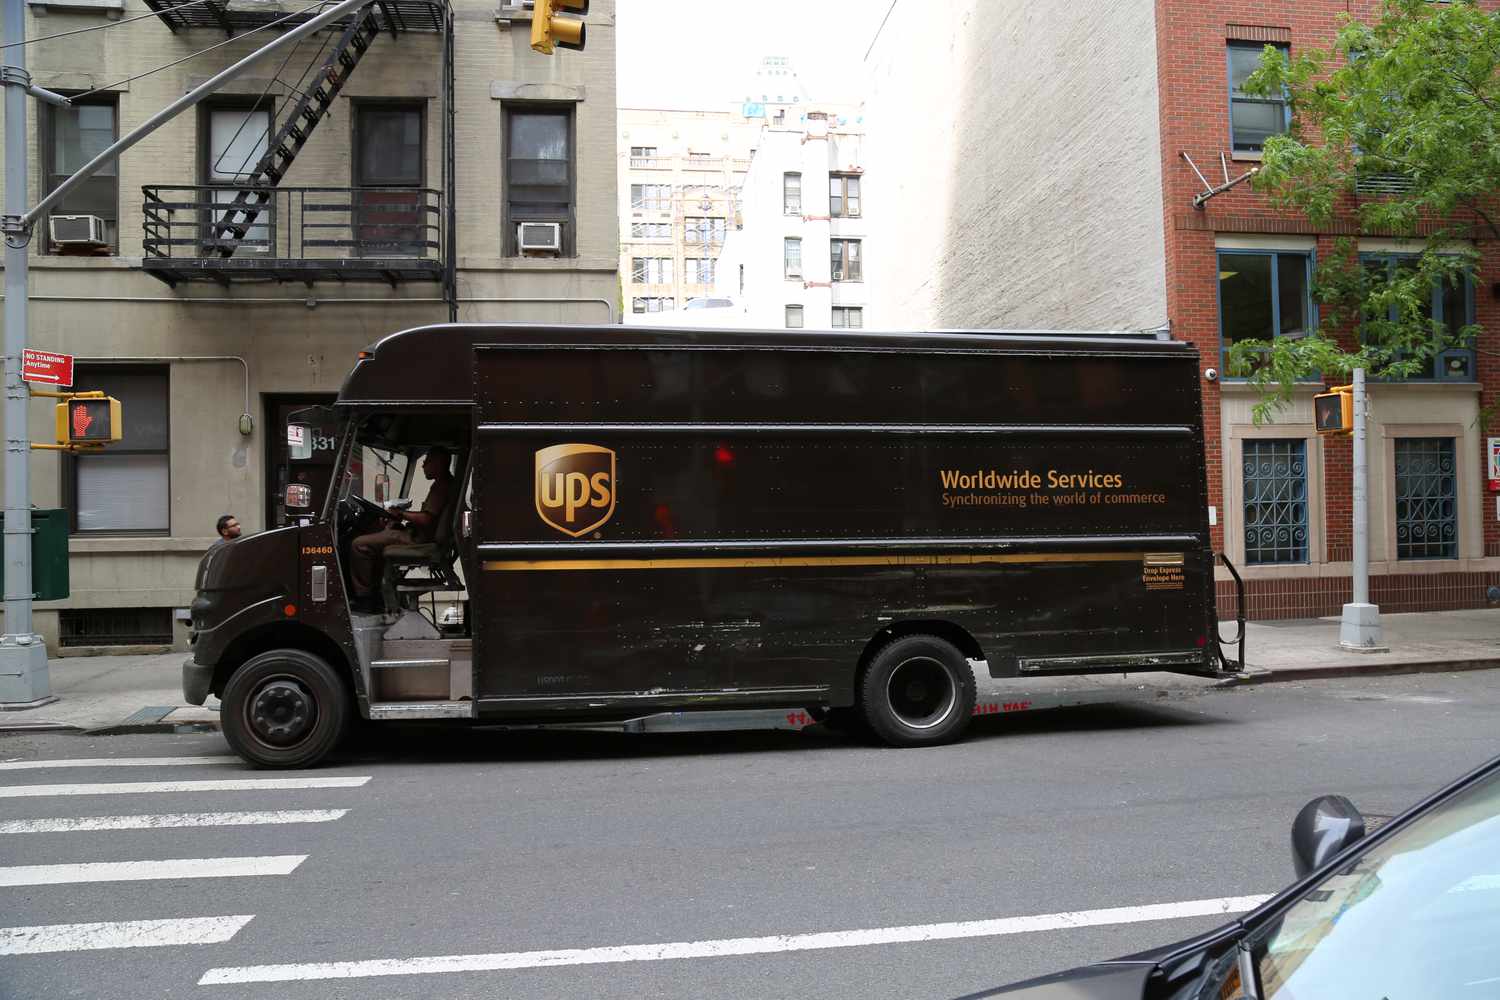 What You Need to Know Ahead of UPS Earnings Tuesday [Video]